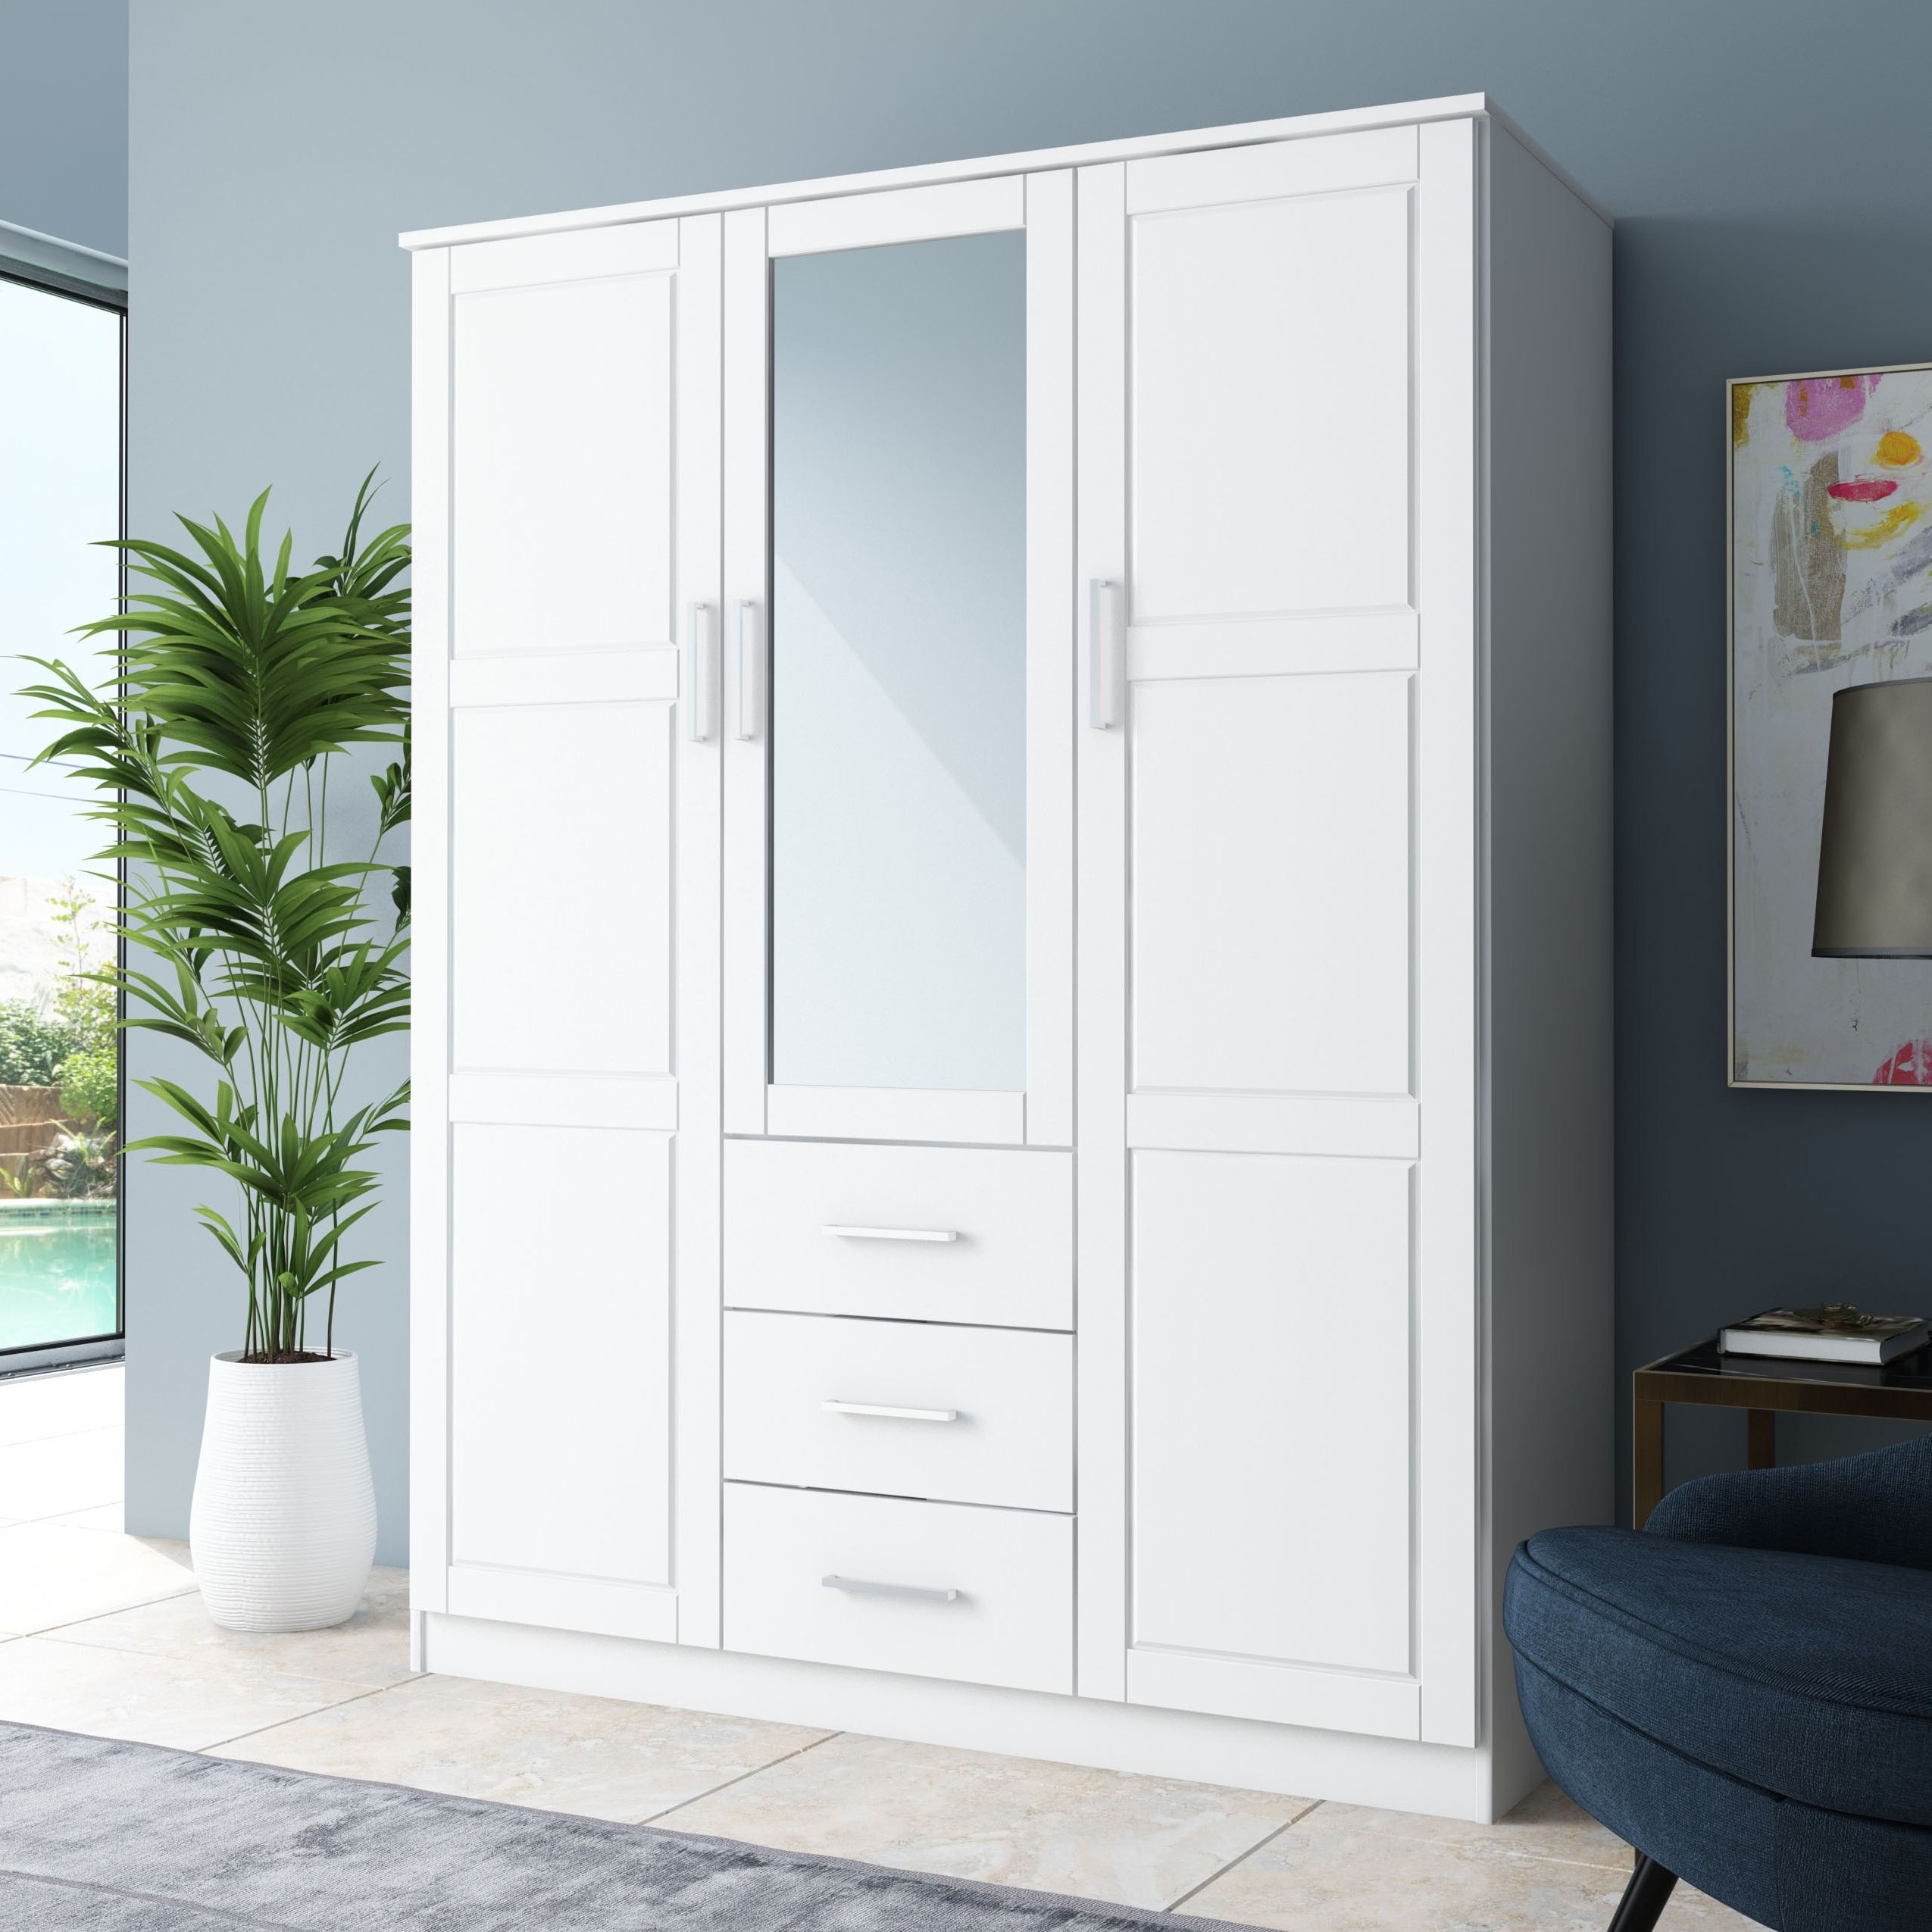 Palace Imports 100% Solid Wood Cosmo 3 Door Wardrobe Armoire With Solid  Wood Or Mirrored Doors – Bed Bath & Beyond – 27120317 With Regard To 3 Door Mirrored Wardrobes (View 16 of 20)